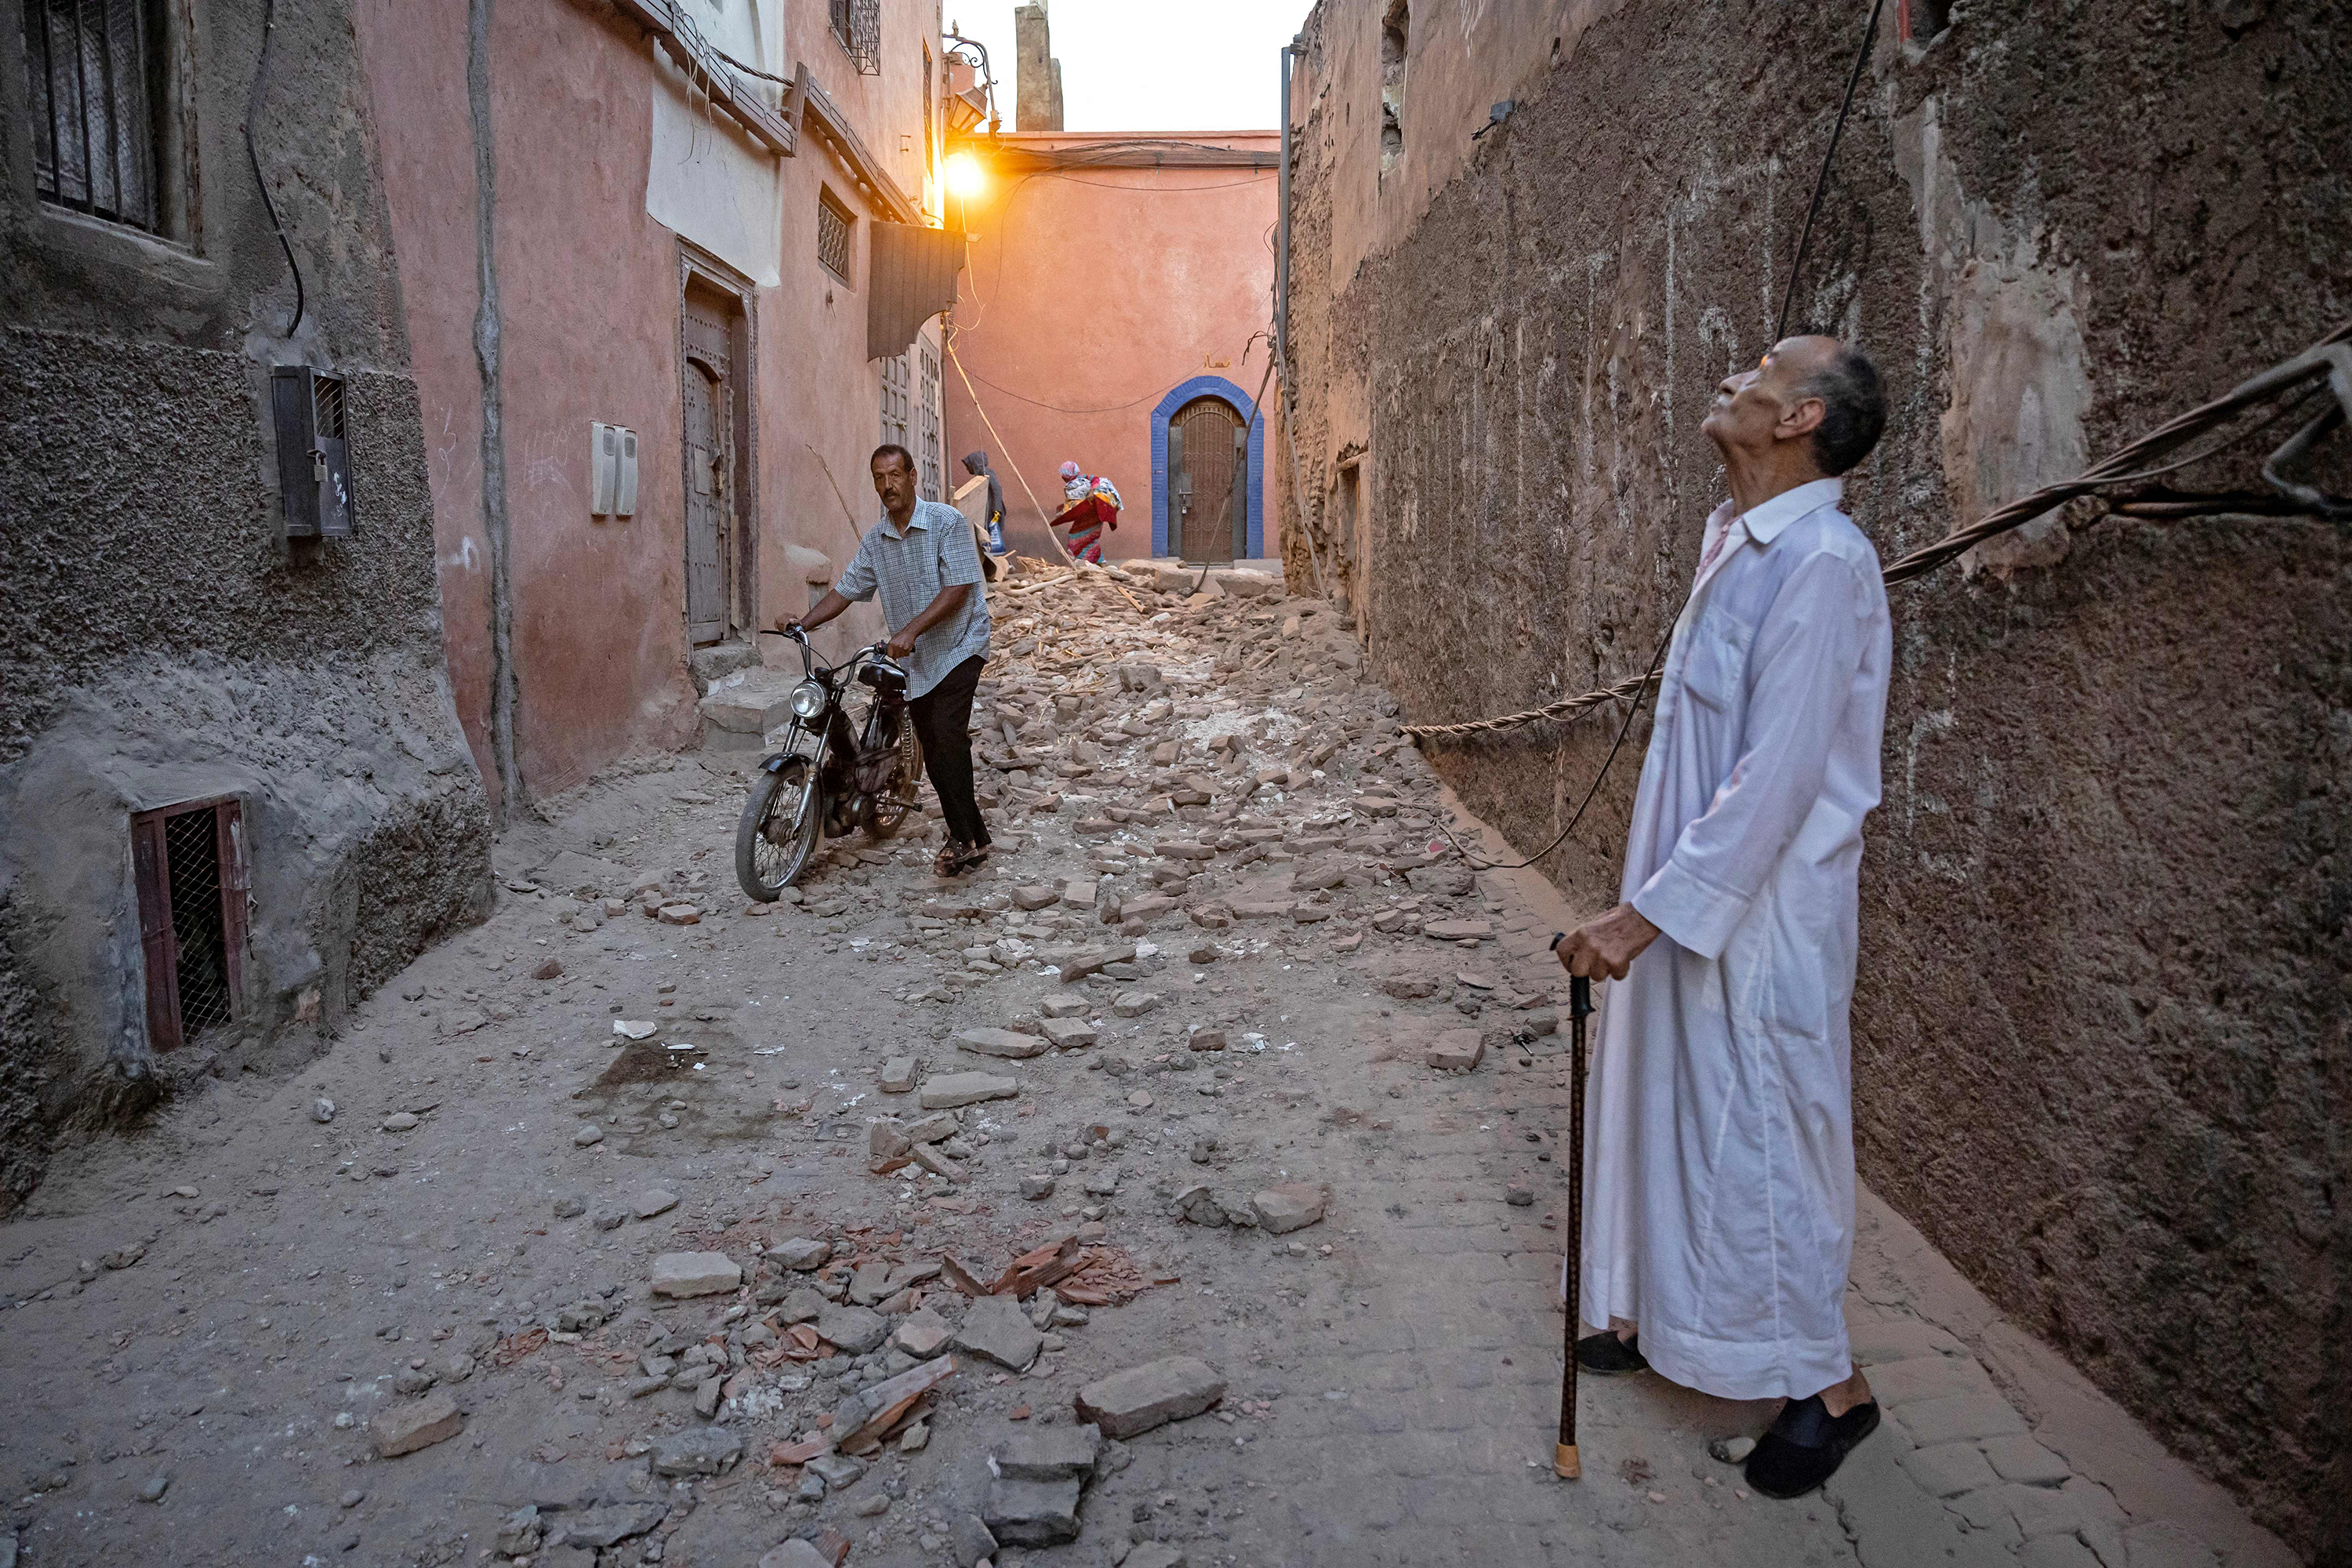 A resident looks at a damaged building in Marrakech on September 9.